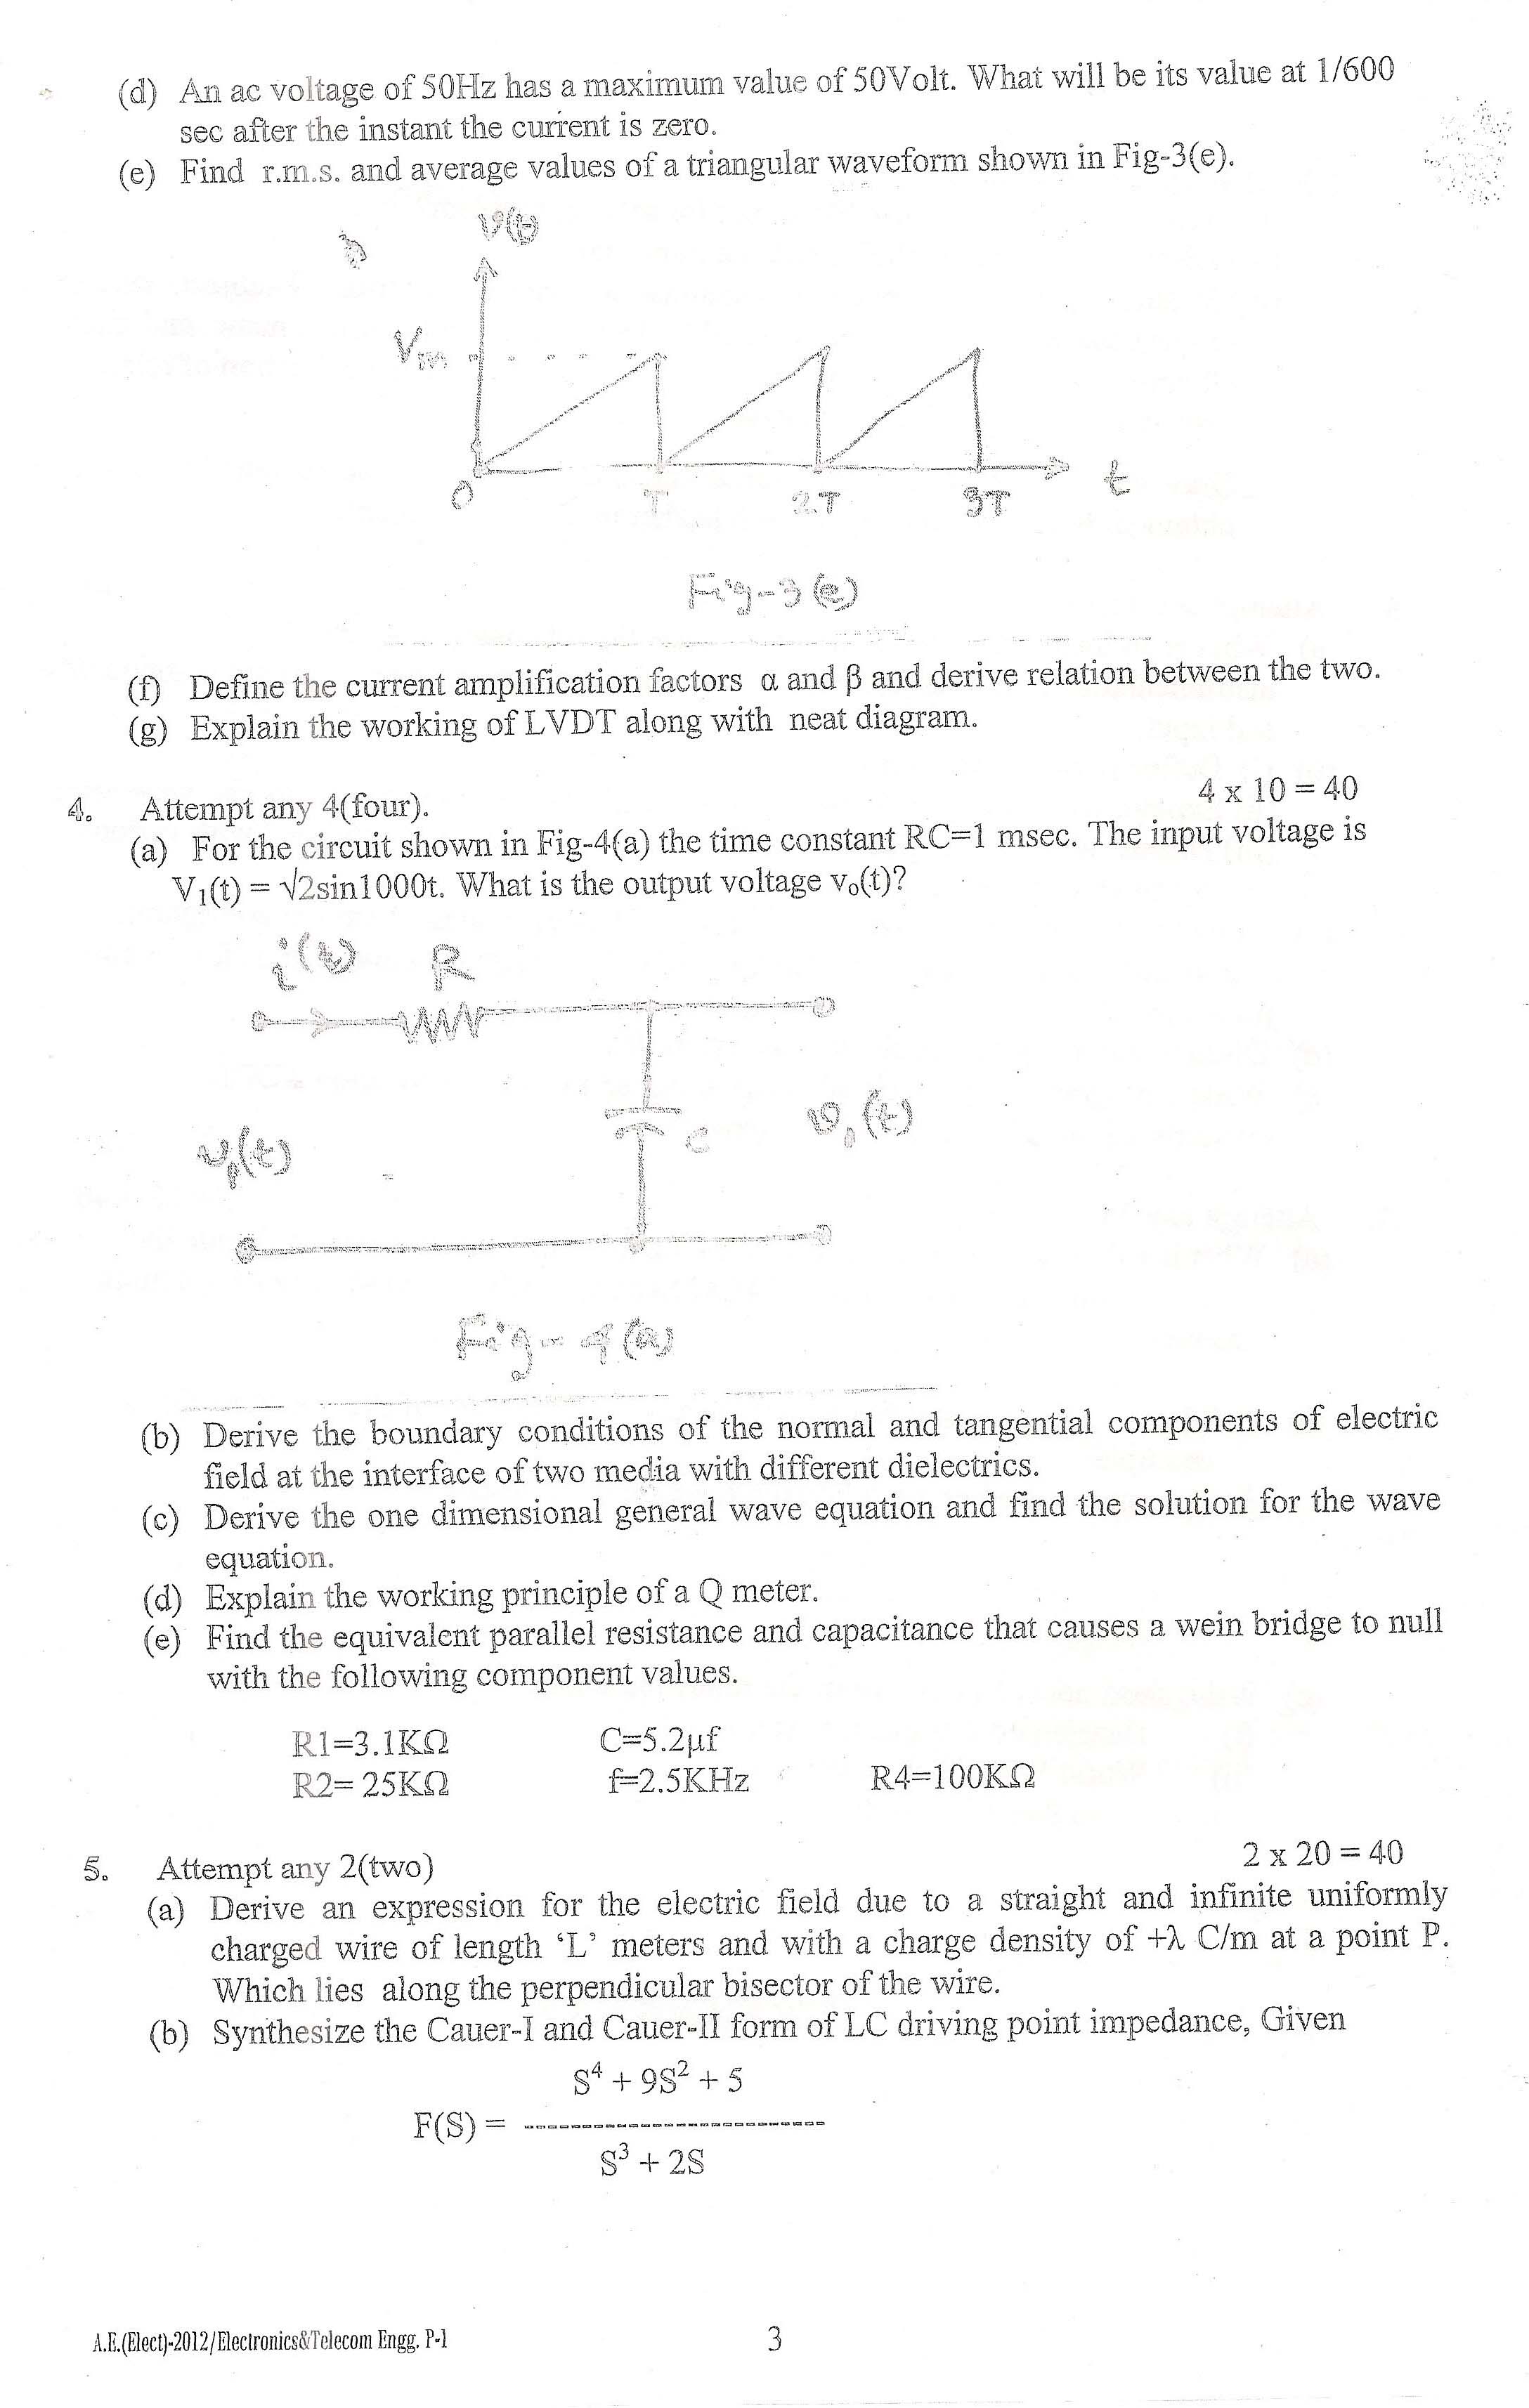 APPSC AE Electrical Exam 2012 Electronics and Telecommunication Paper I 3